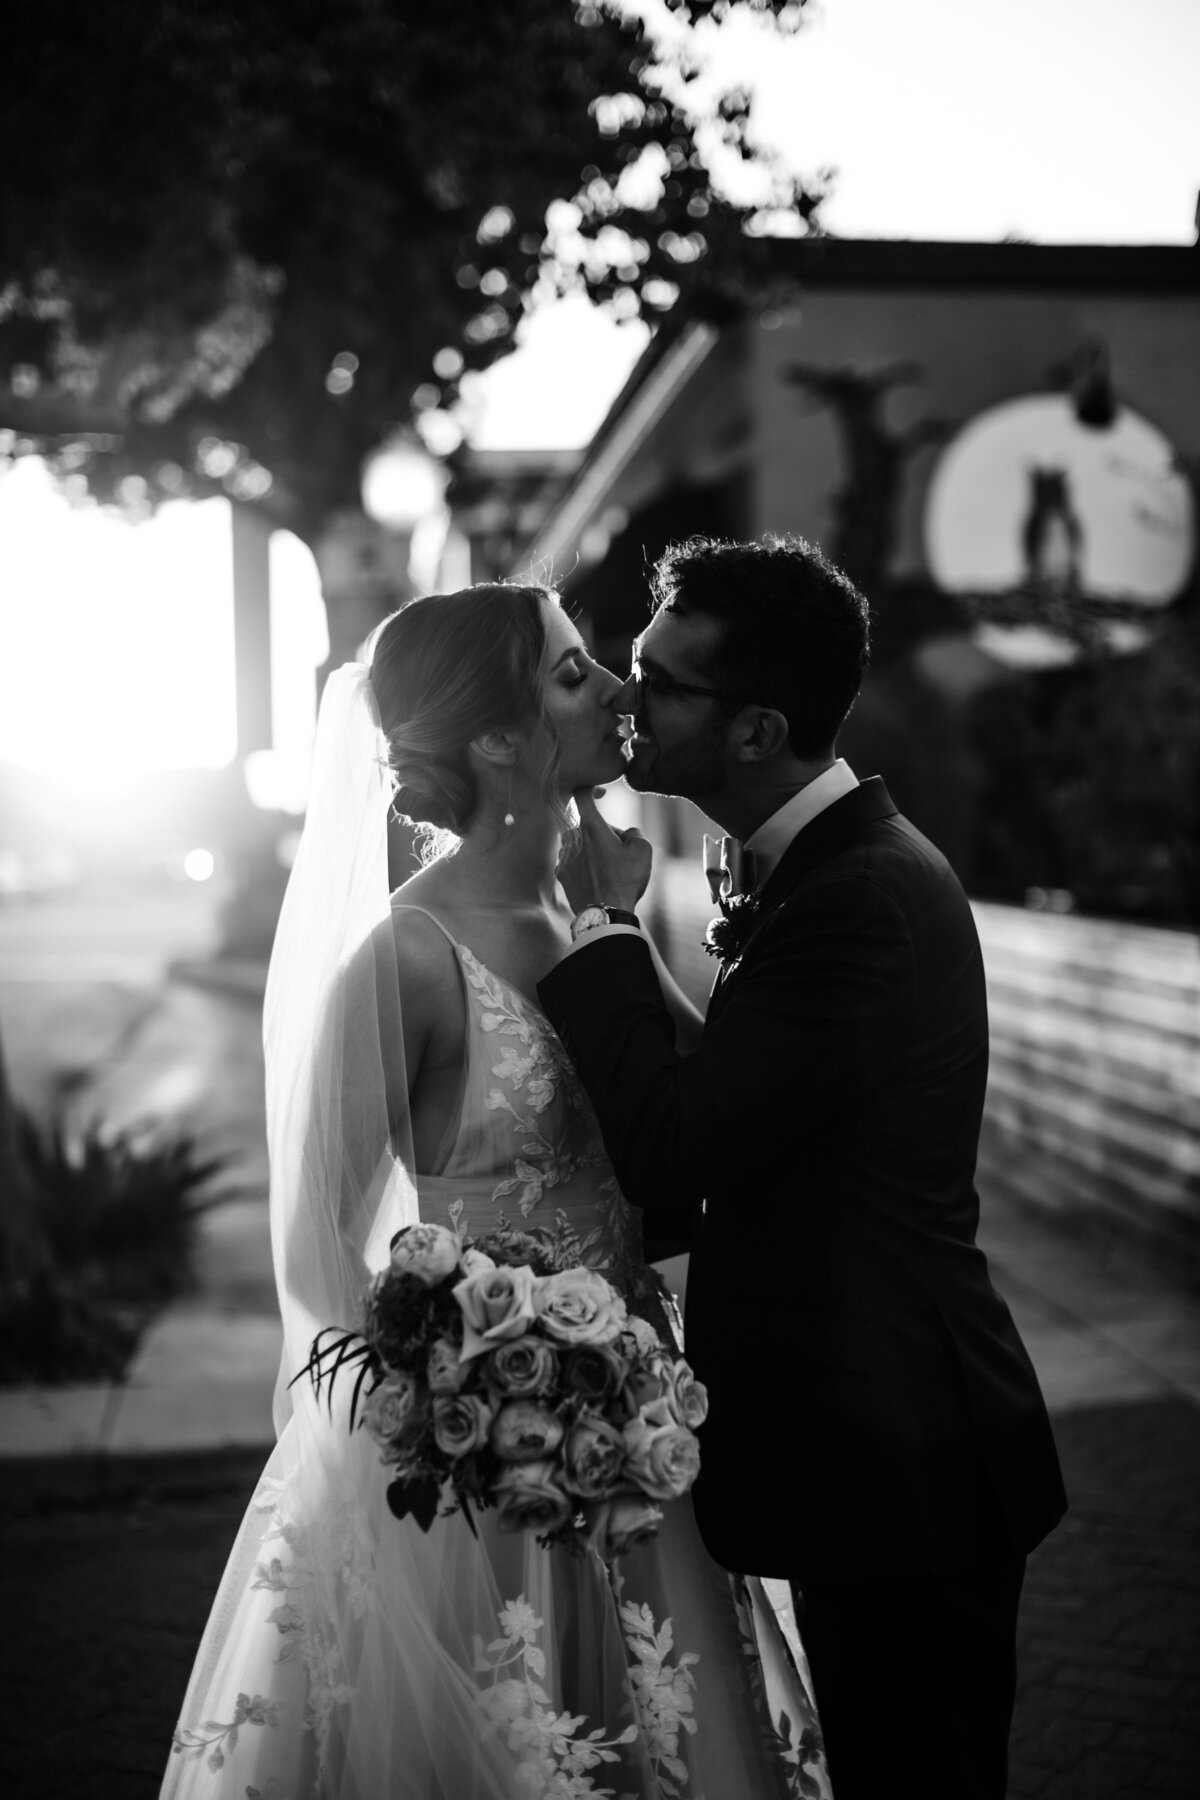 Archer Inspired Photography - Kayleigh and Emmanuel Wedding - Fullerton CA-590